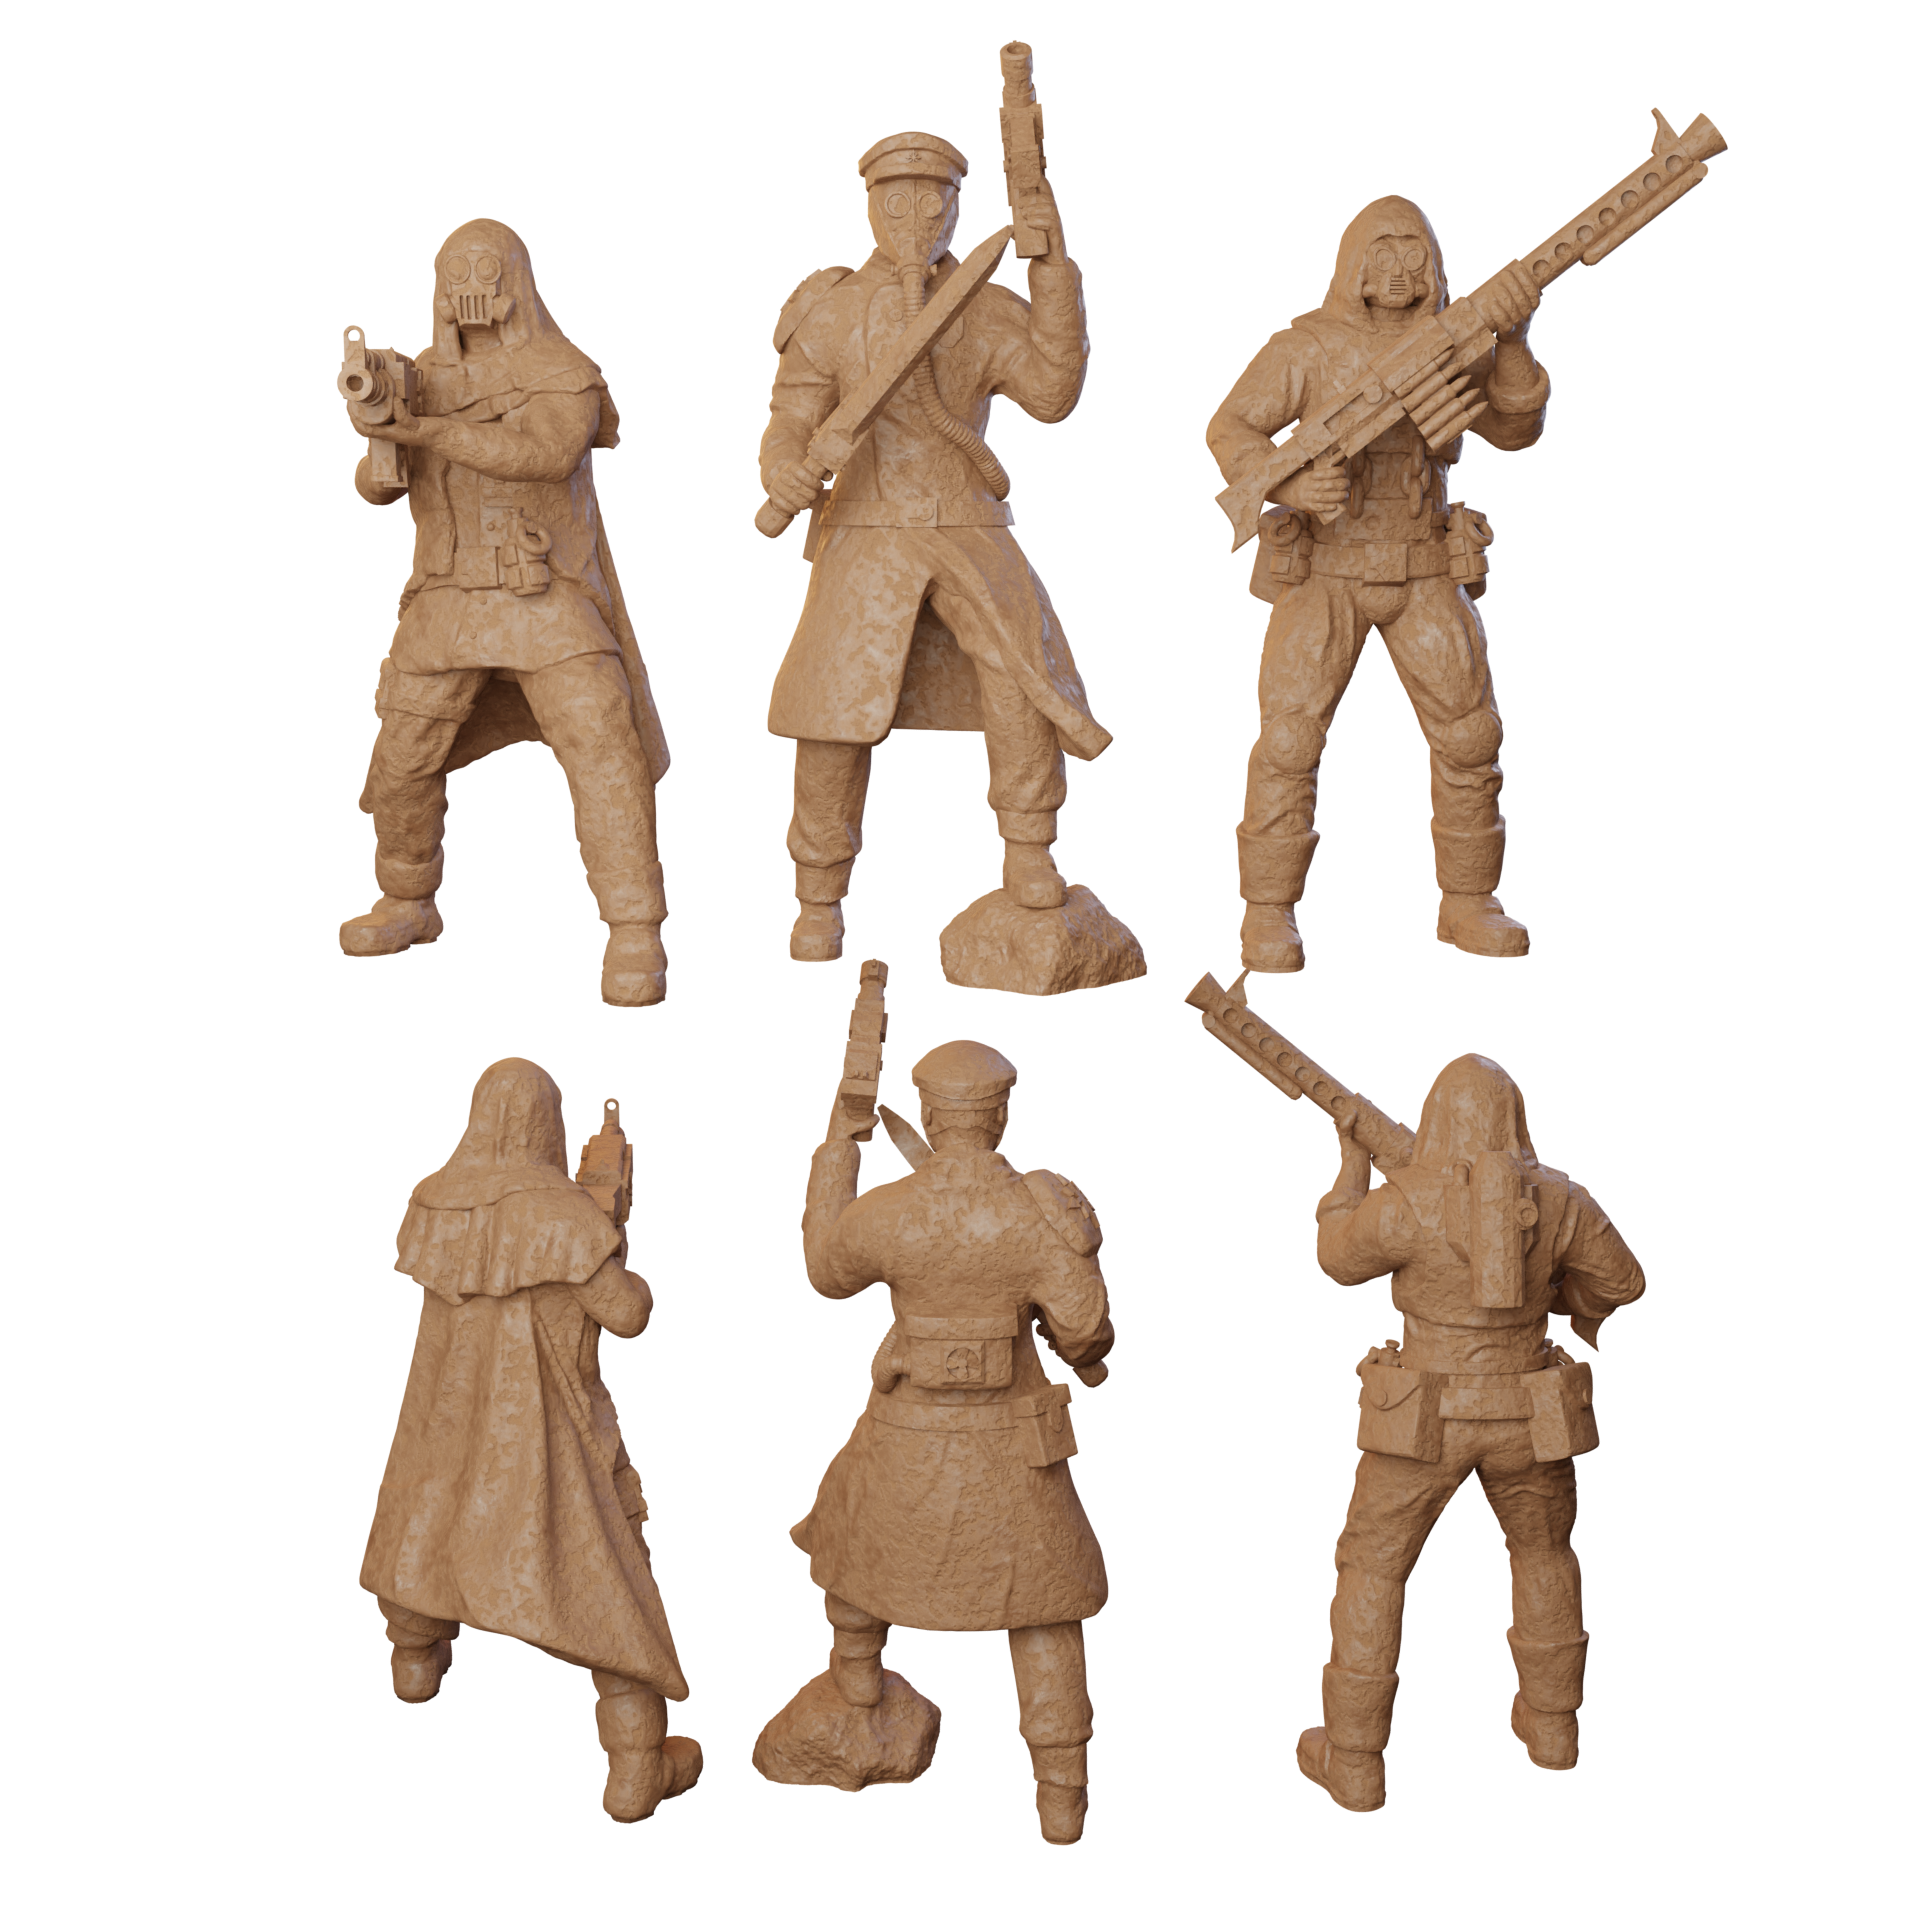 SCIFI CULTISTS / RAIDER / SOLDIERS 28MM MINIS (3 IN 1 PACK)